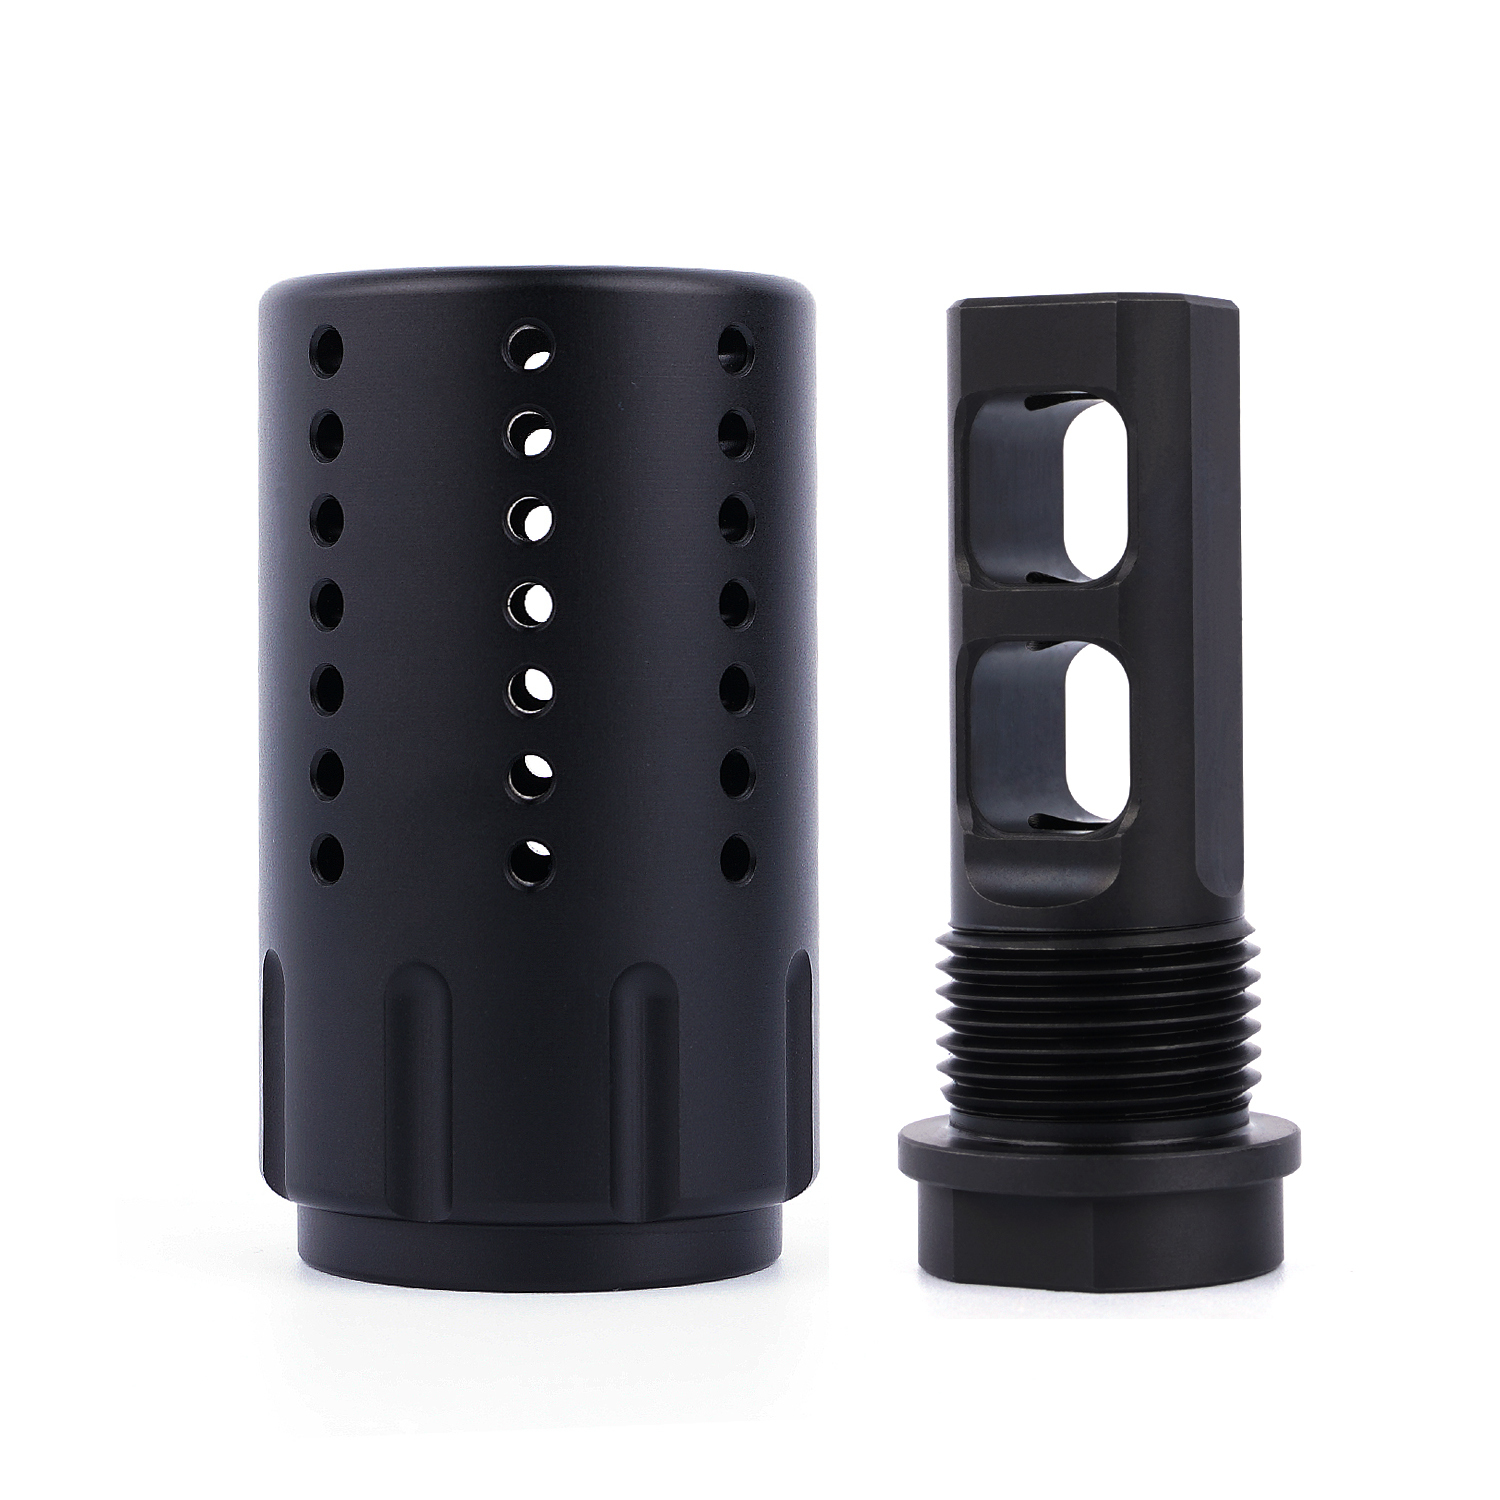 Stainless 9mm Muzzle Device Brake /2-28 with Concussion Redirector .